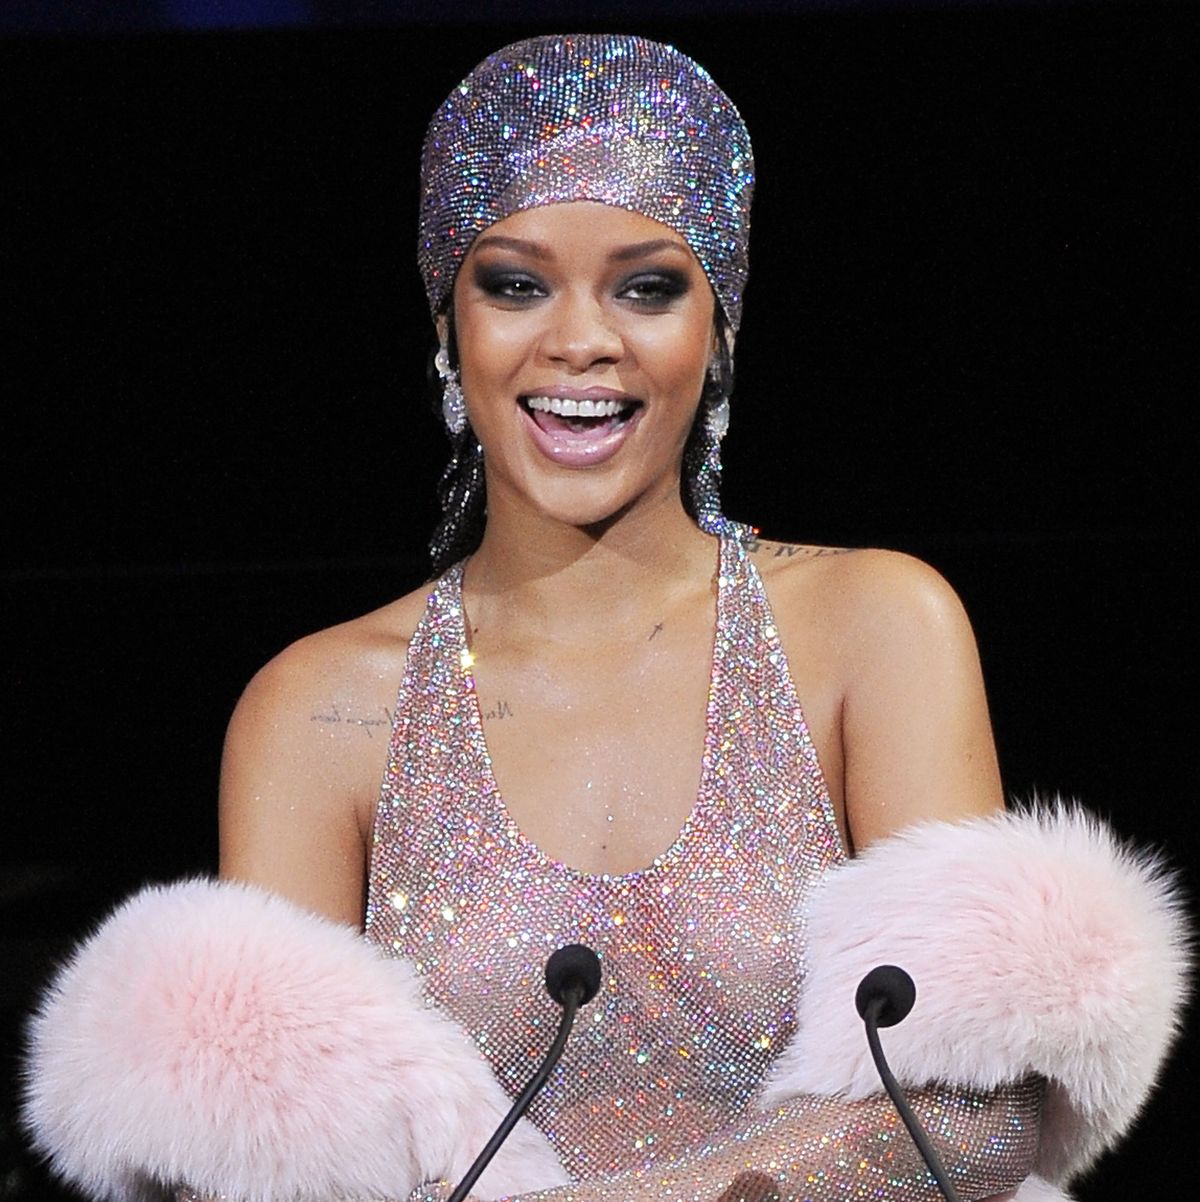 new york, ny   june 02  editors note image contains nudity rihanna speaks onstage at the 2014 cfda fashion awards at alice tully hall, lincoln center on june 2, 2014 in new york city  photo by d dipasupilgetty images